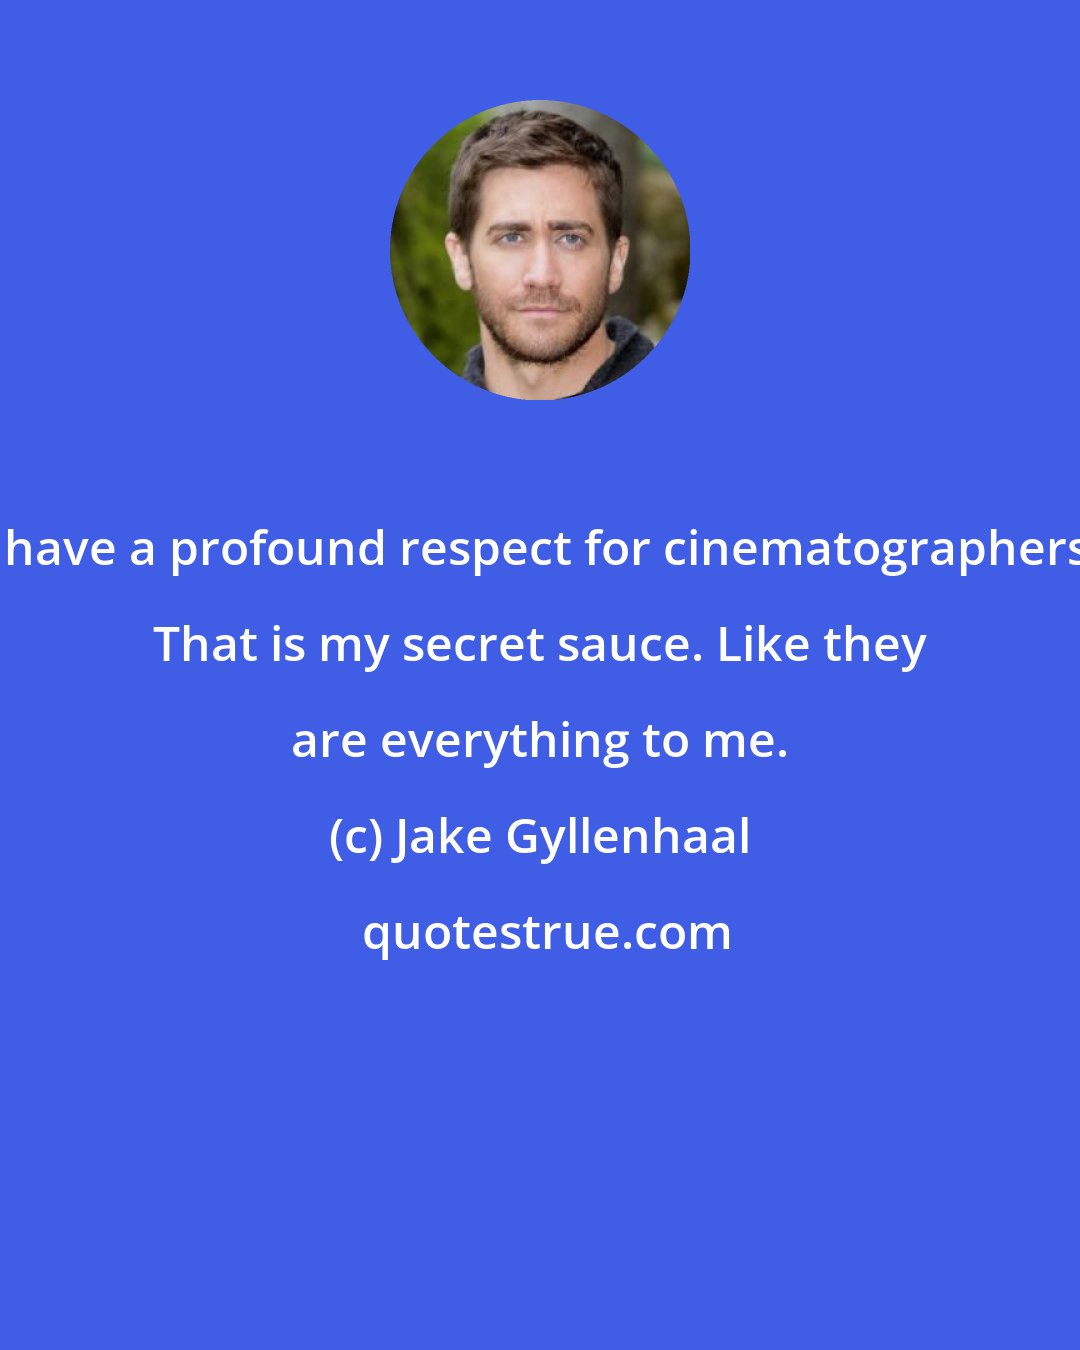 Jake Gyllenhaal: I have a profound respect for cinematographers. That is my secret sauce. Like they are everything to me.